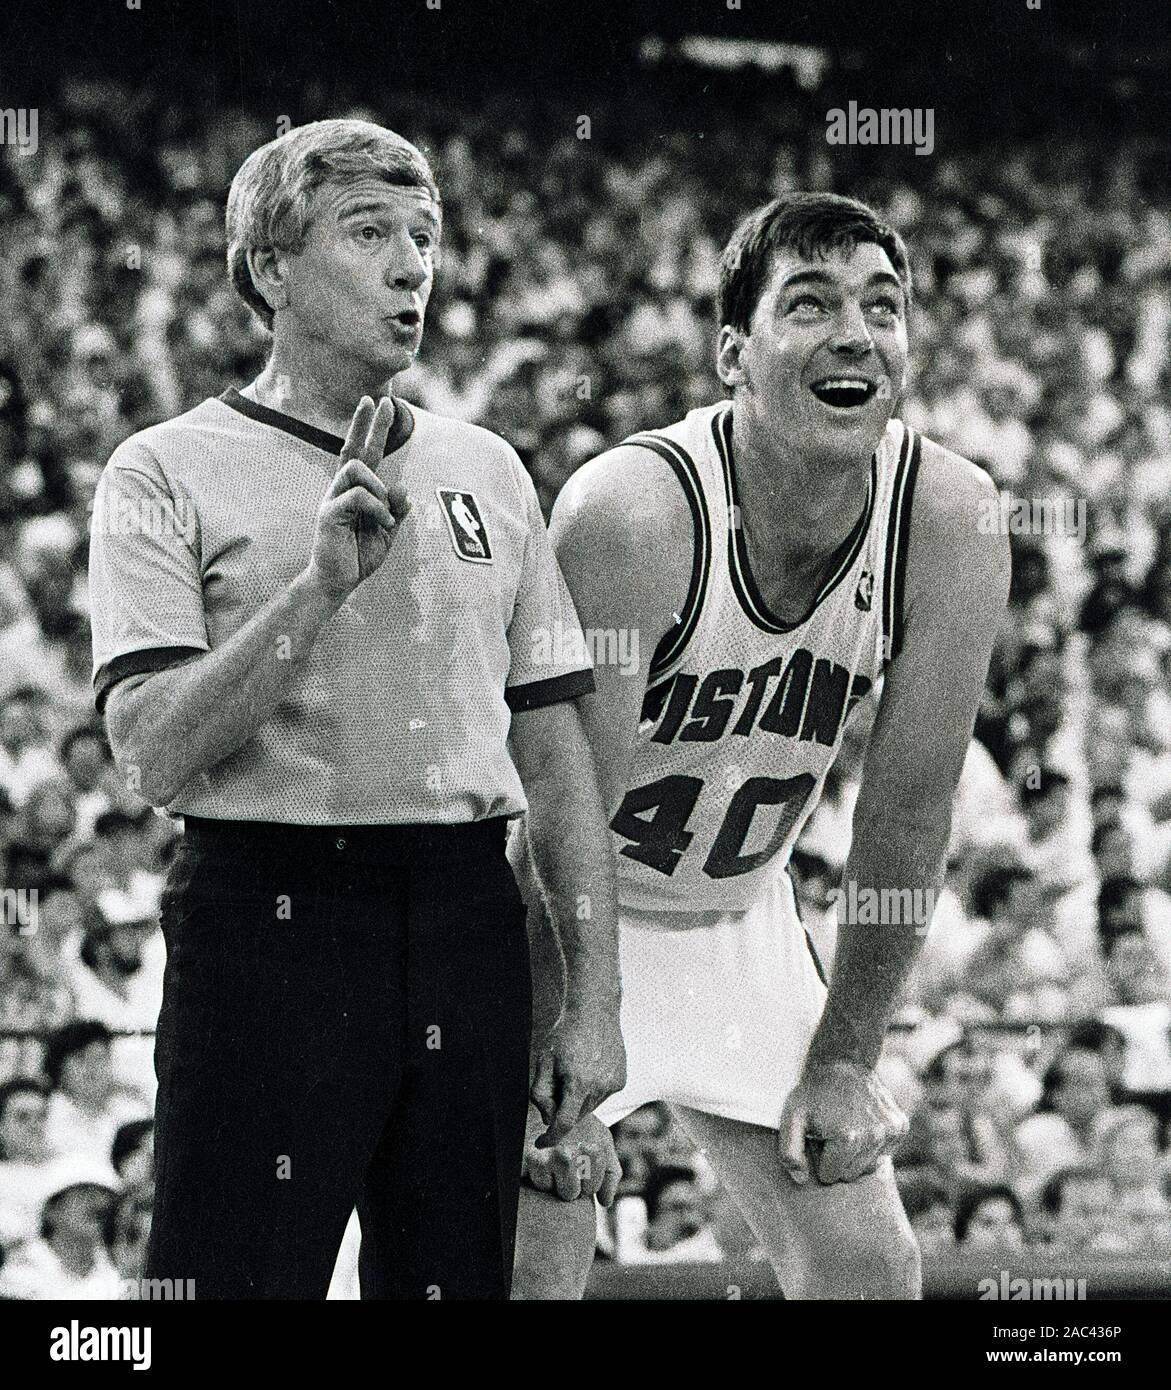 Detroit Pistons Bill Laimbeer at the free throw line  during the 1988 nba playoffs in detroit Michigan USA May 1988 photo by bill belknap Stock Photo